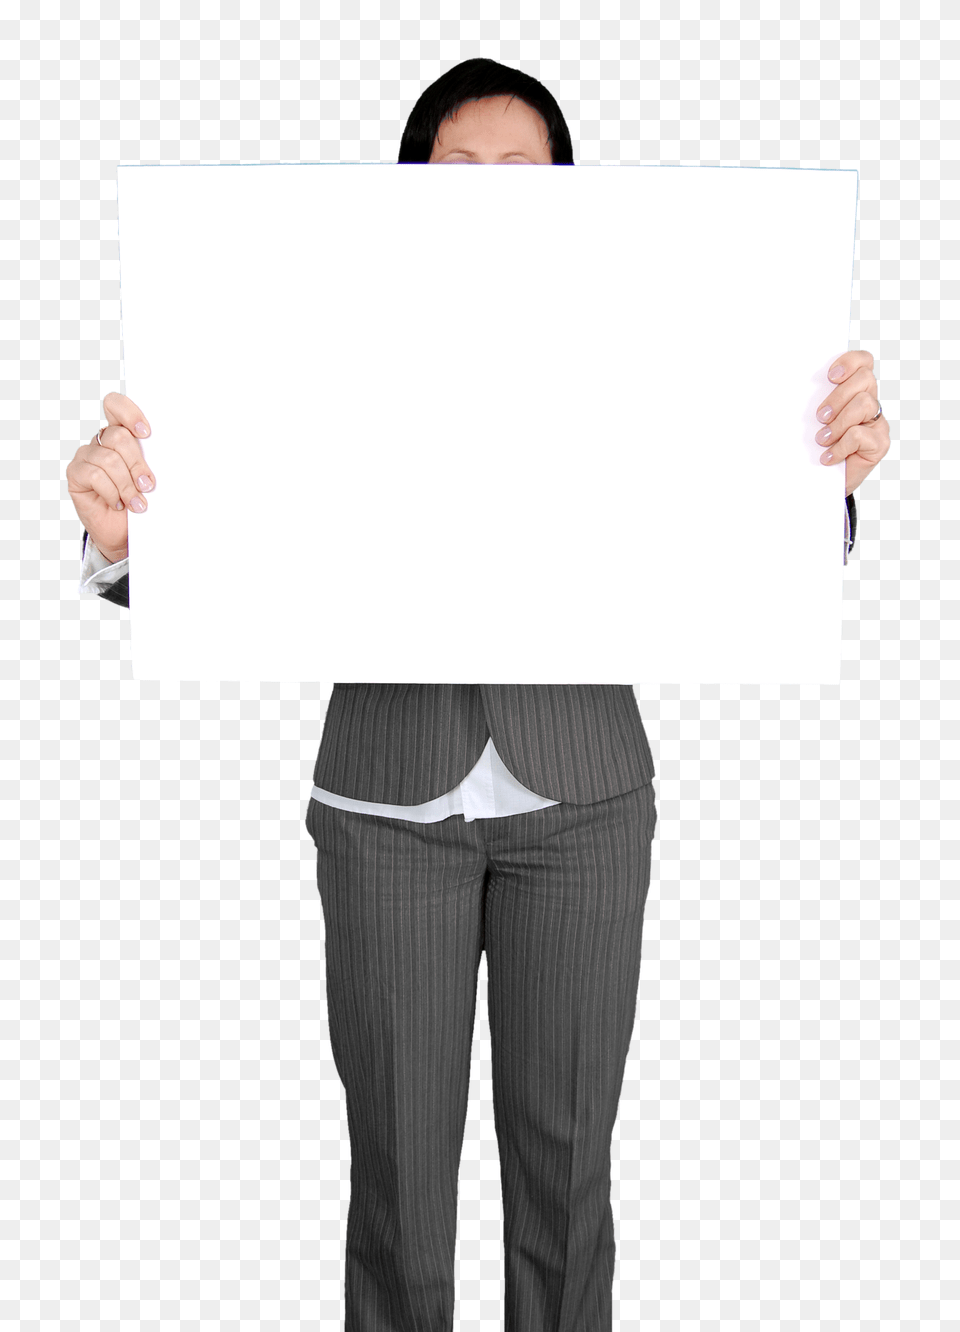 Pngpix Com Business Woman Holding Blank White Board Image, White Board, Clothing, Suit, Formal Wear Free Png Download